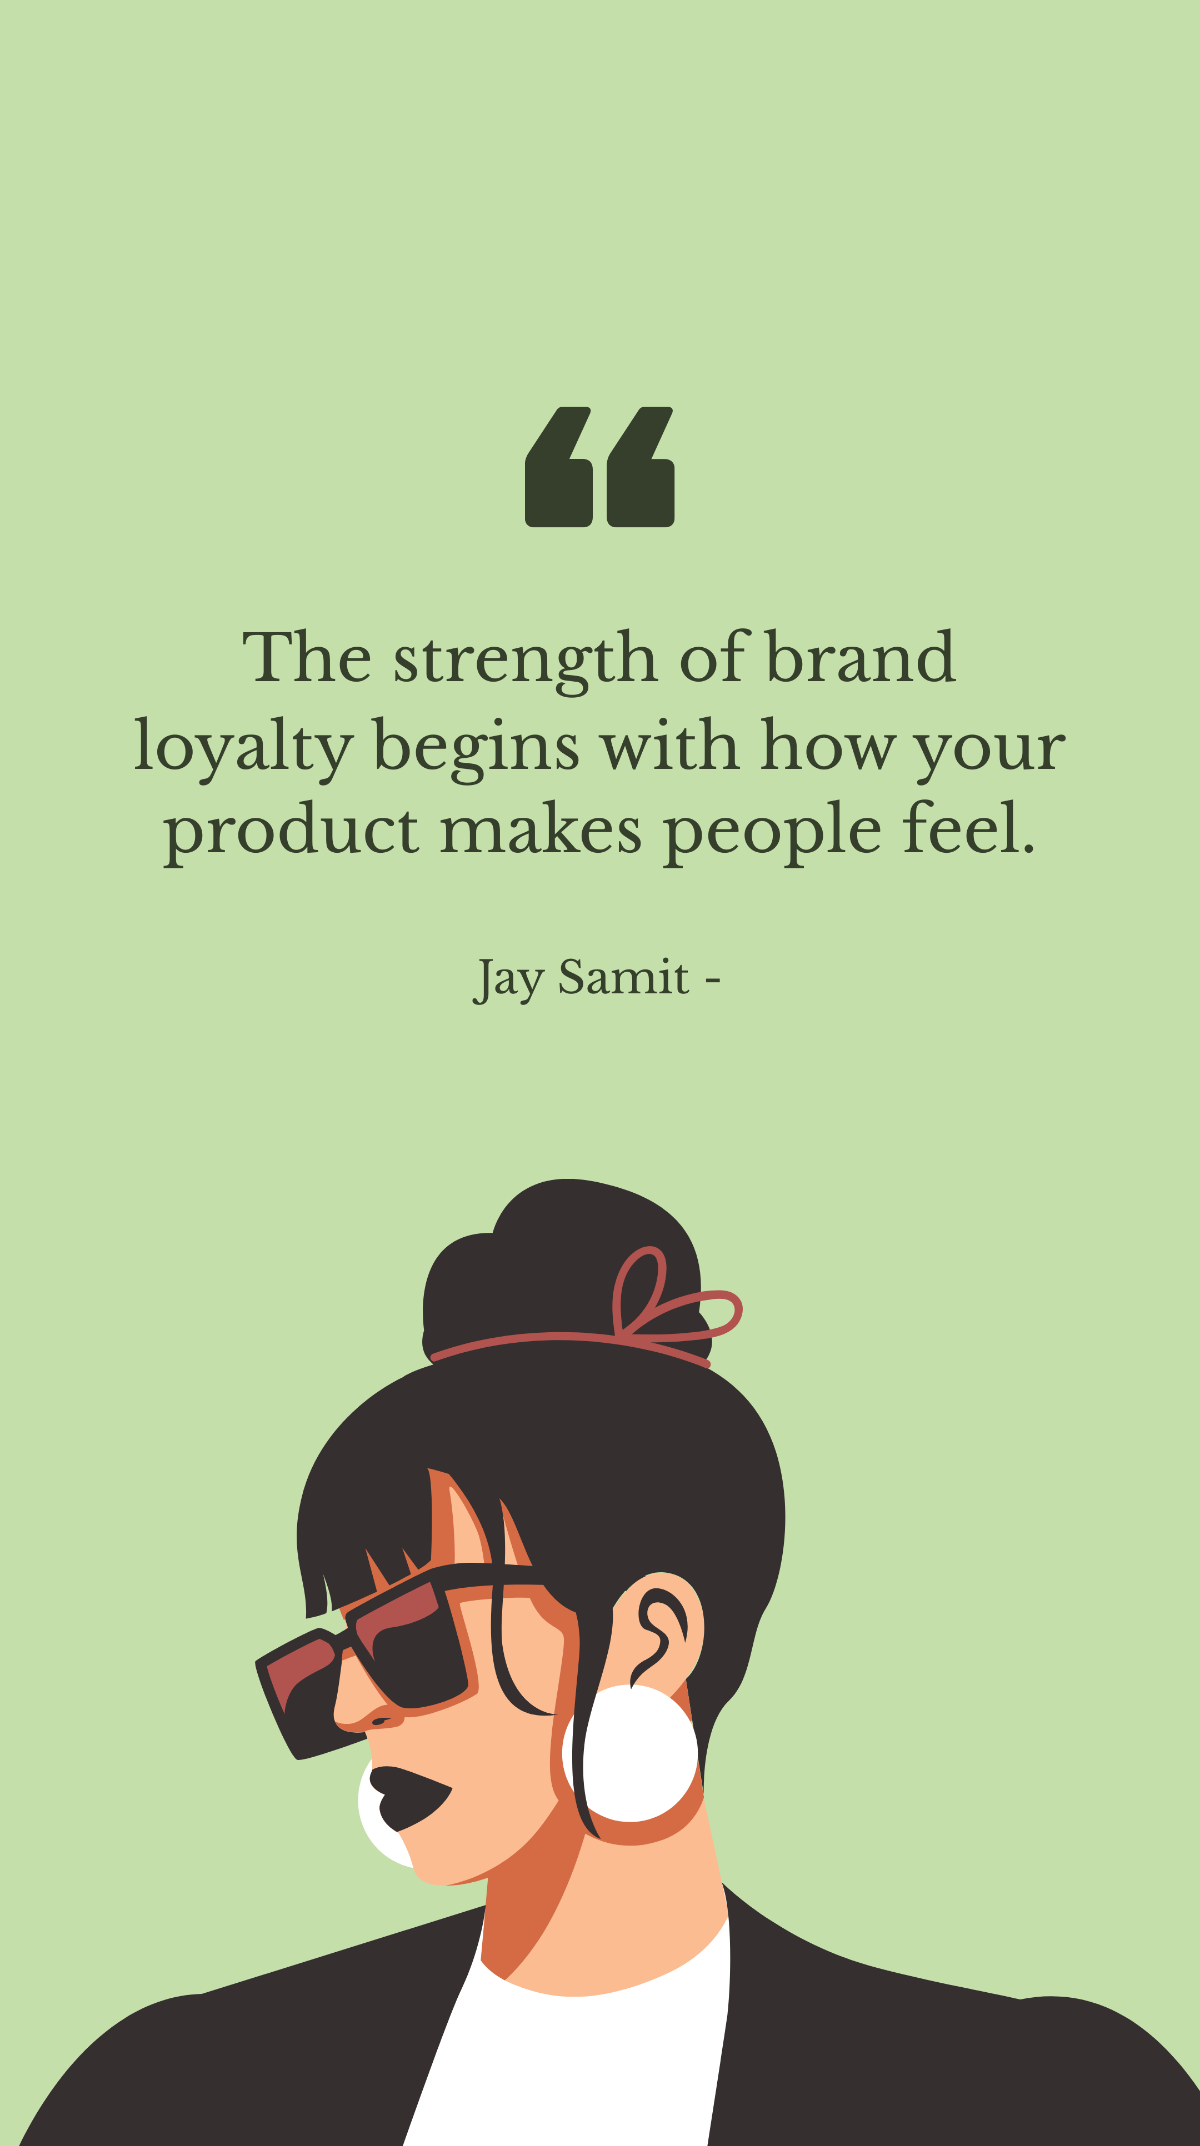 Free Jay Samit - The strength of brand loyalty begins with how your product makes people feel. Template